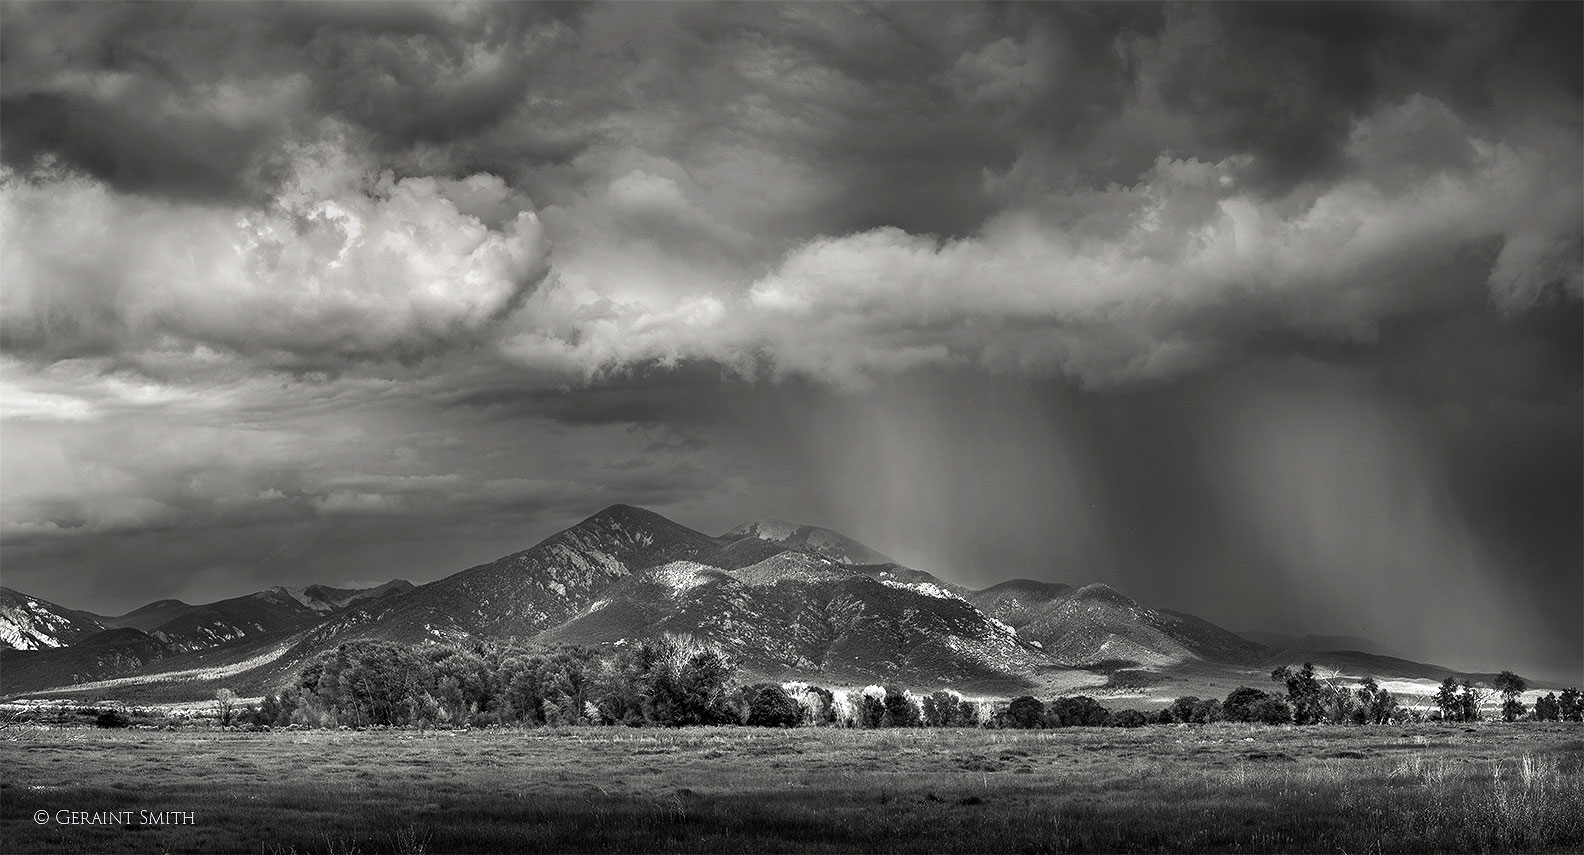 Taos Mountain storm in Black and white